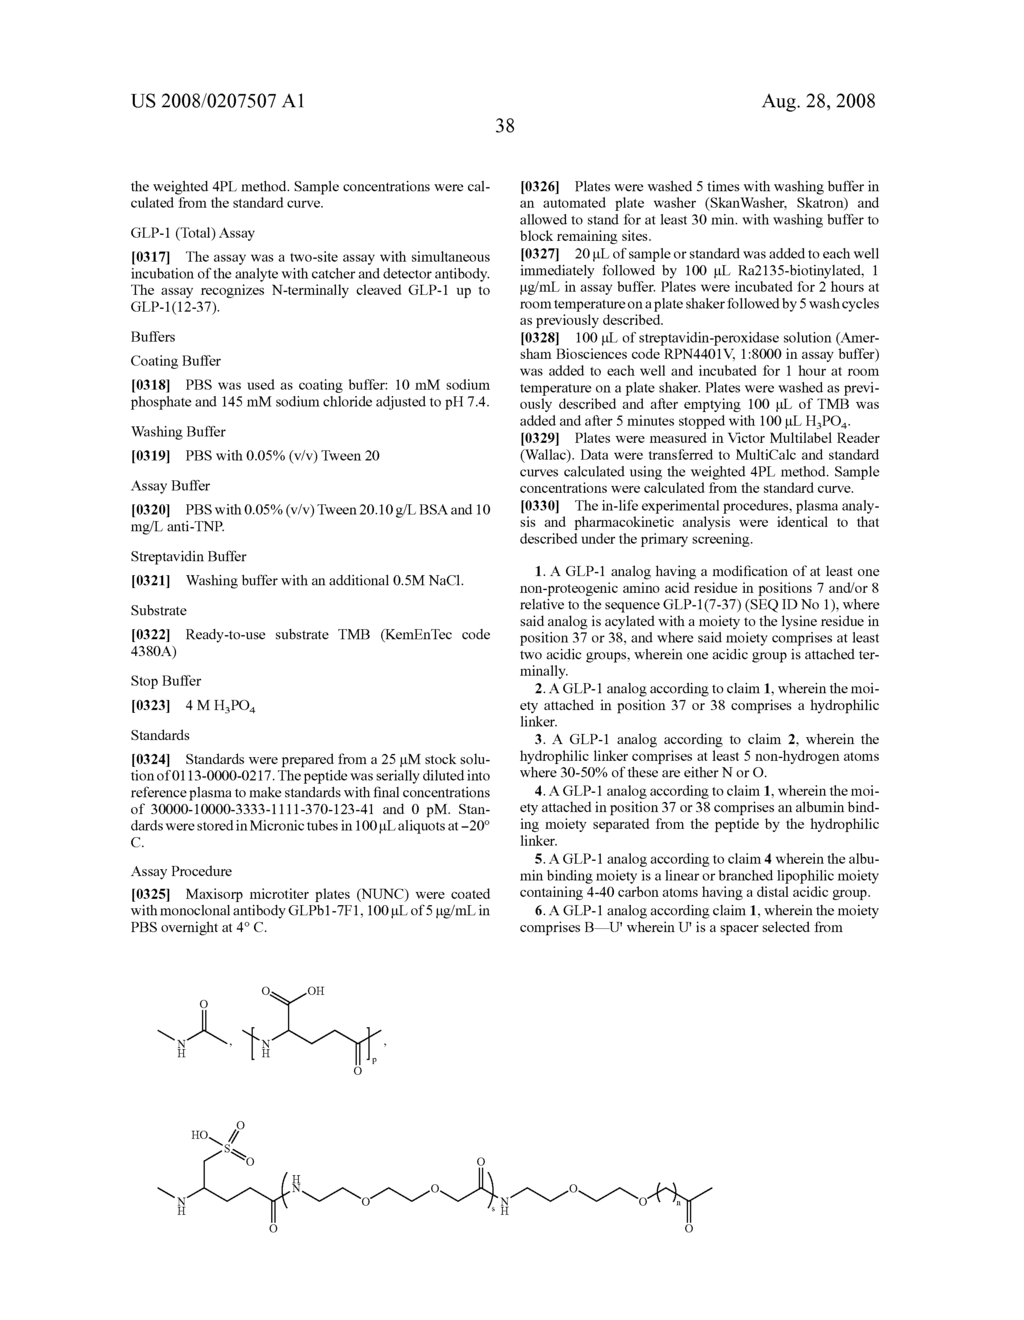 Extended Glp-1 Compounds - diagram, schematic, and image 39